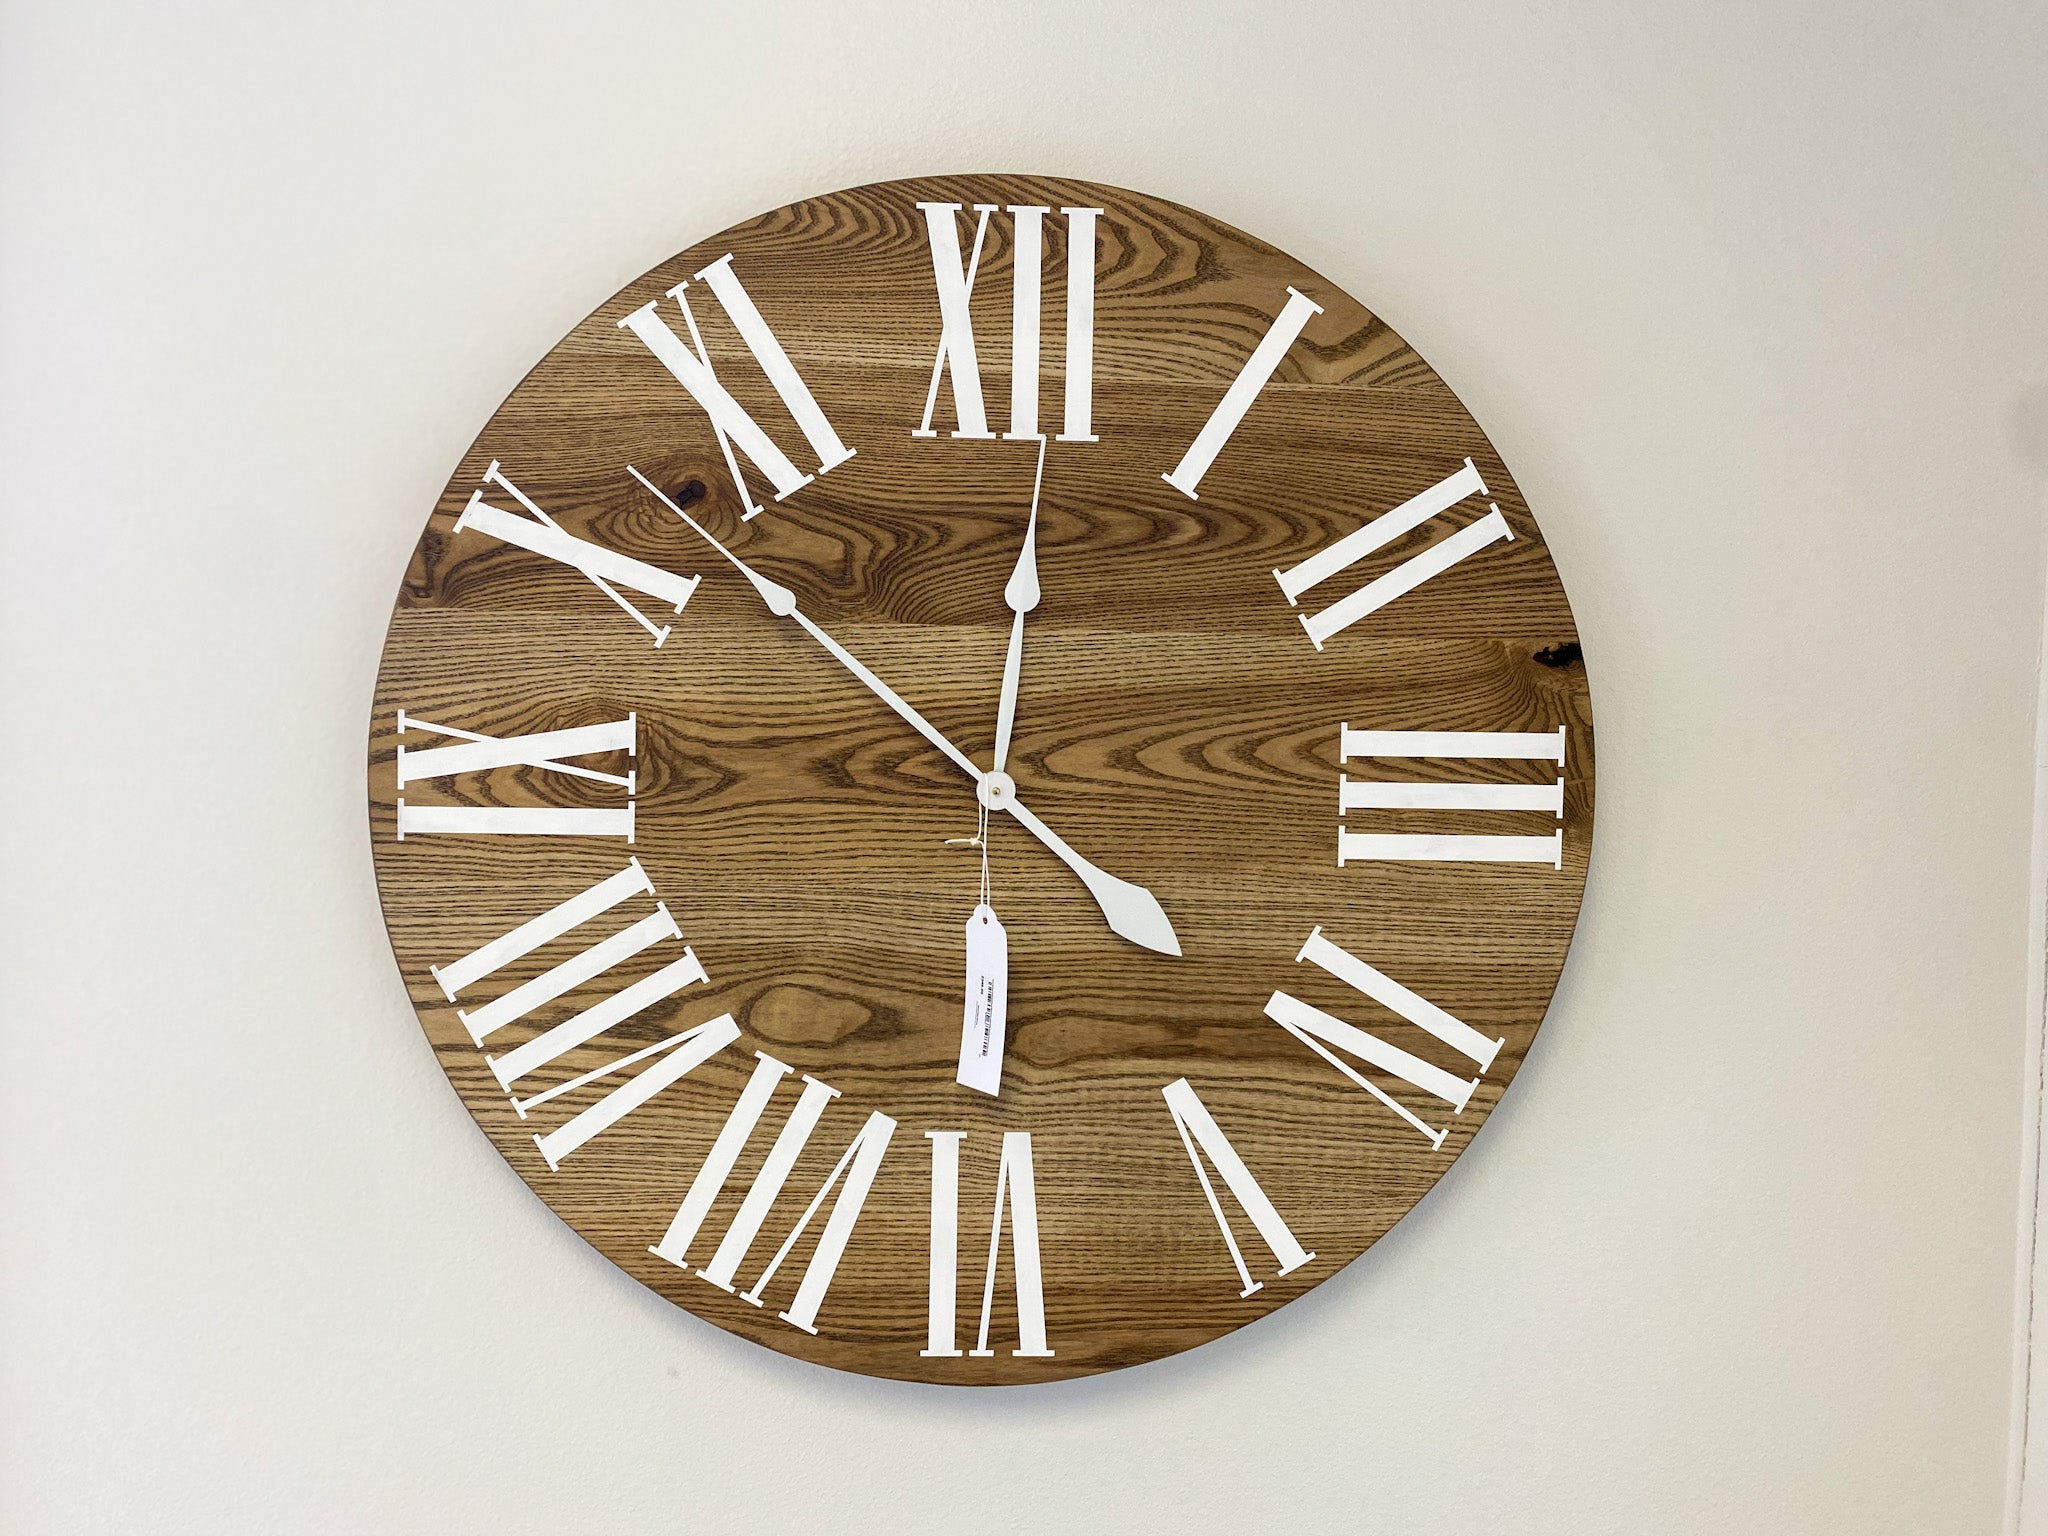 Dark Stained Solid Ash Wood Wall Clock with White Roman Numerals - Hazel Oak Farms Handmade Furniture in Iowa, USA